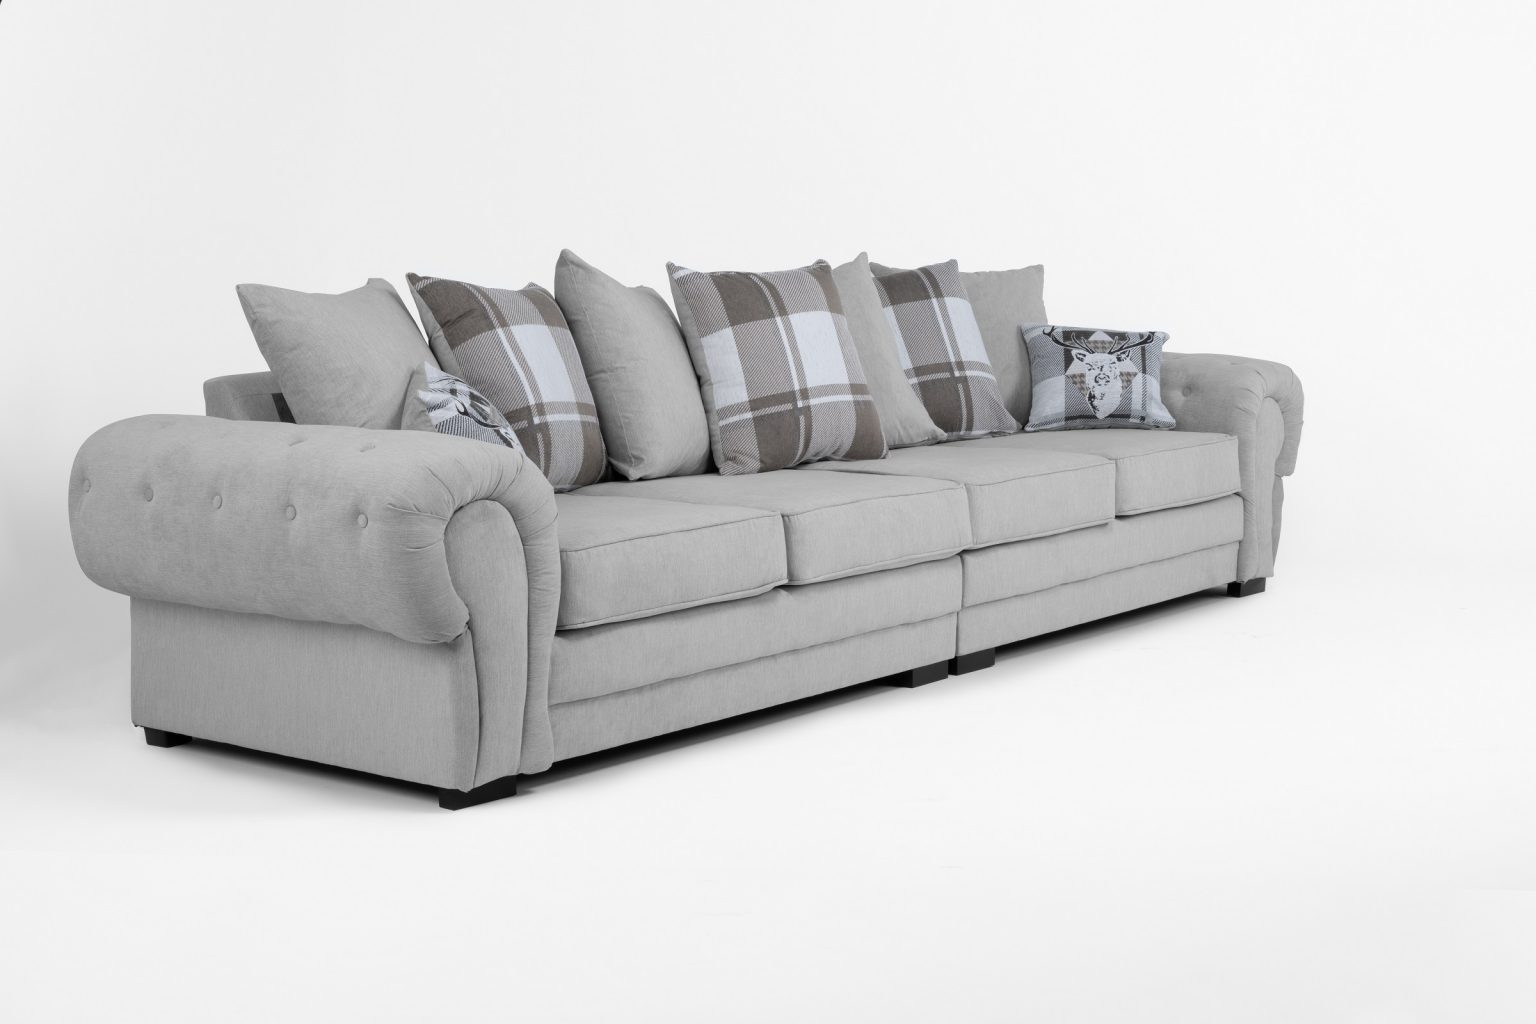 scatter back sofa meaning